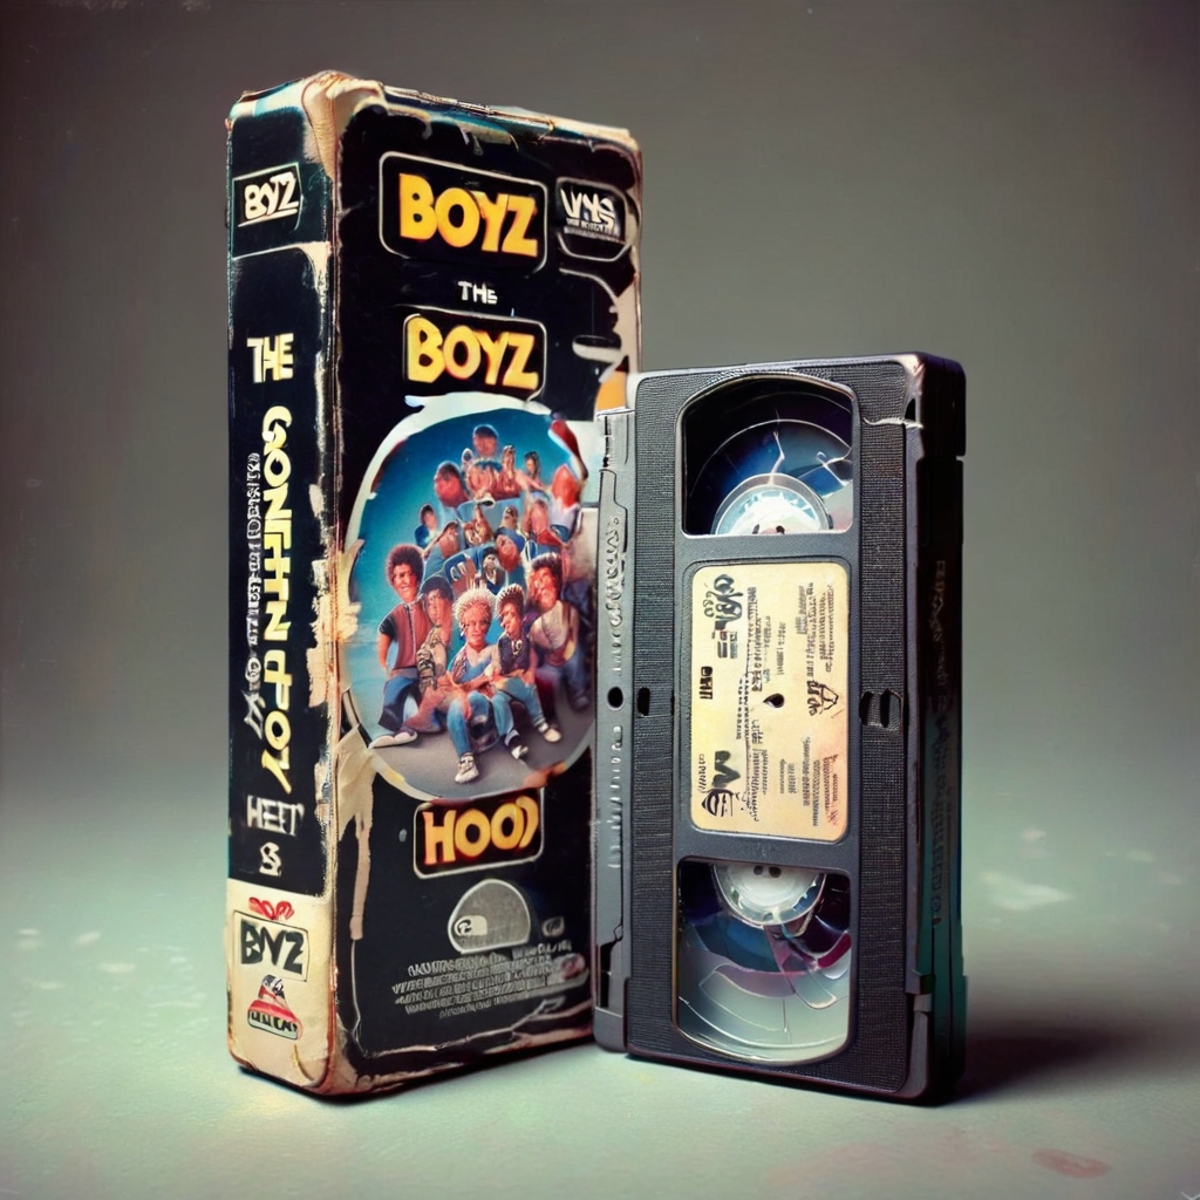 VHS tape - be kind and rewind image by socalguitarist